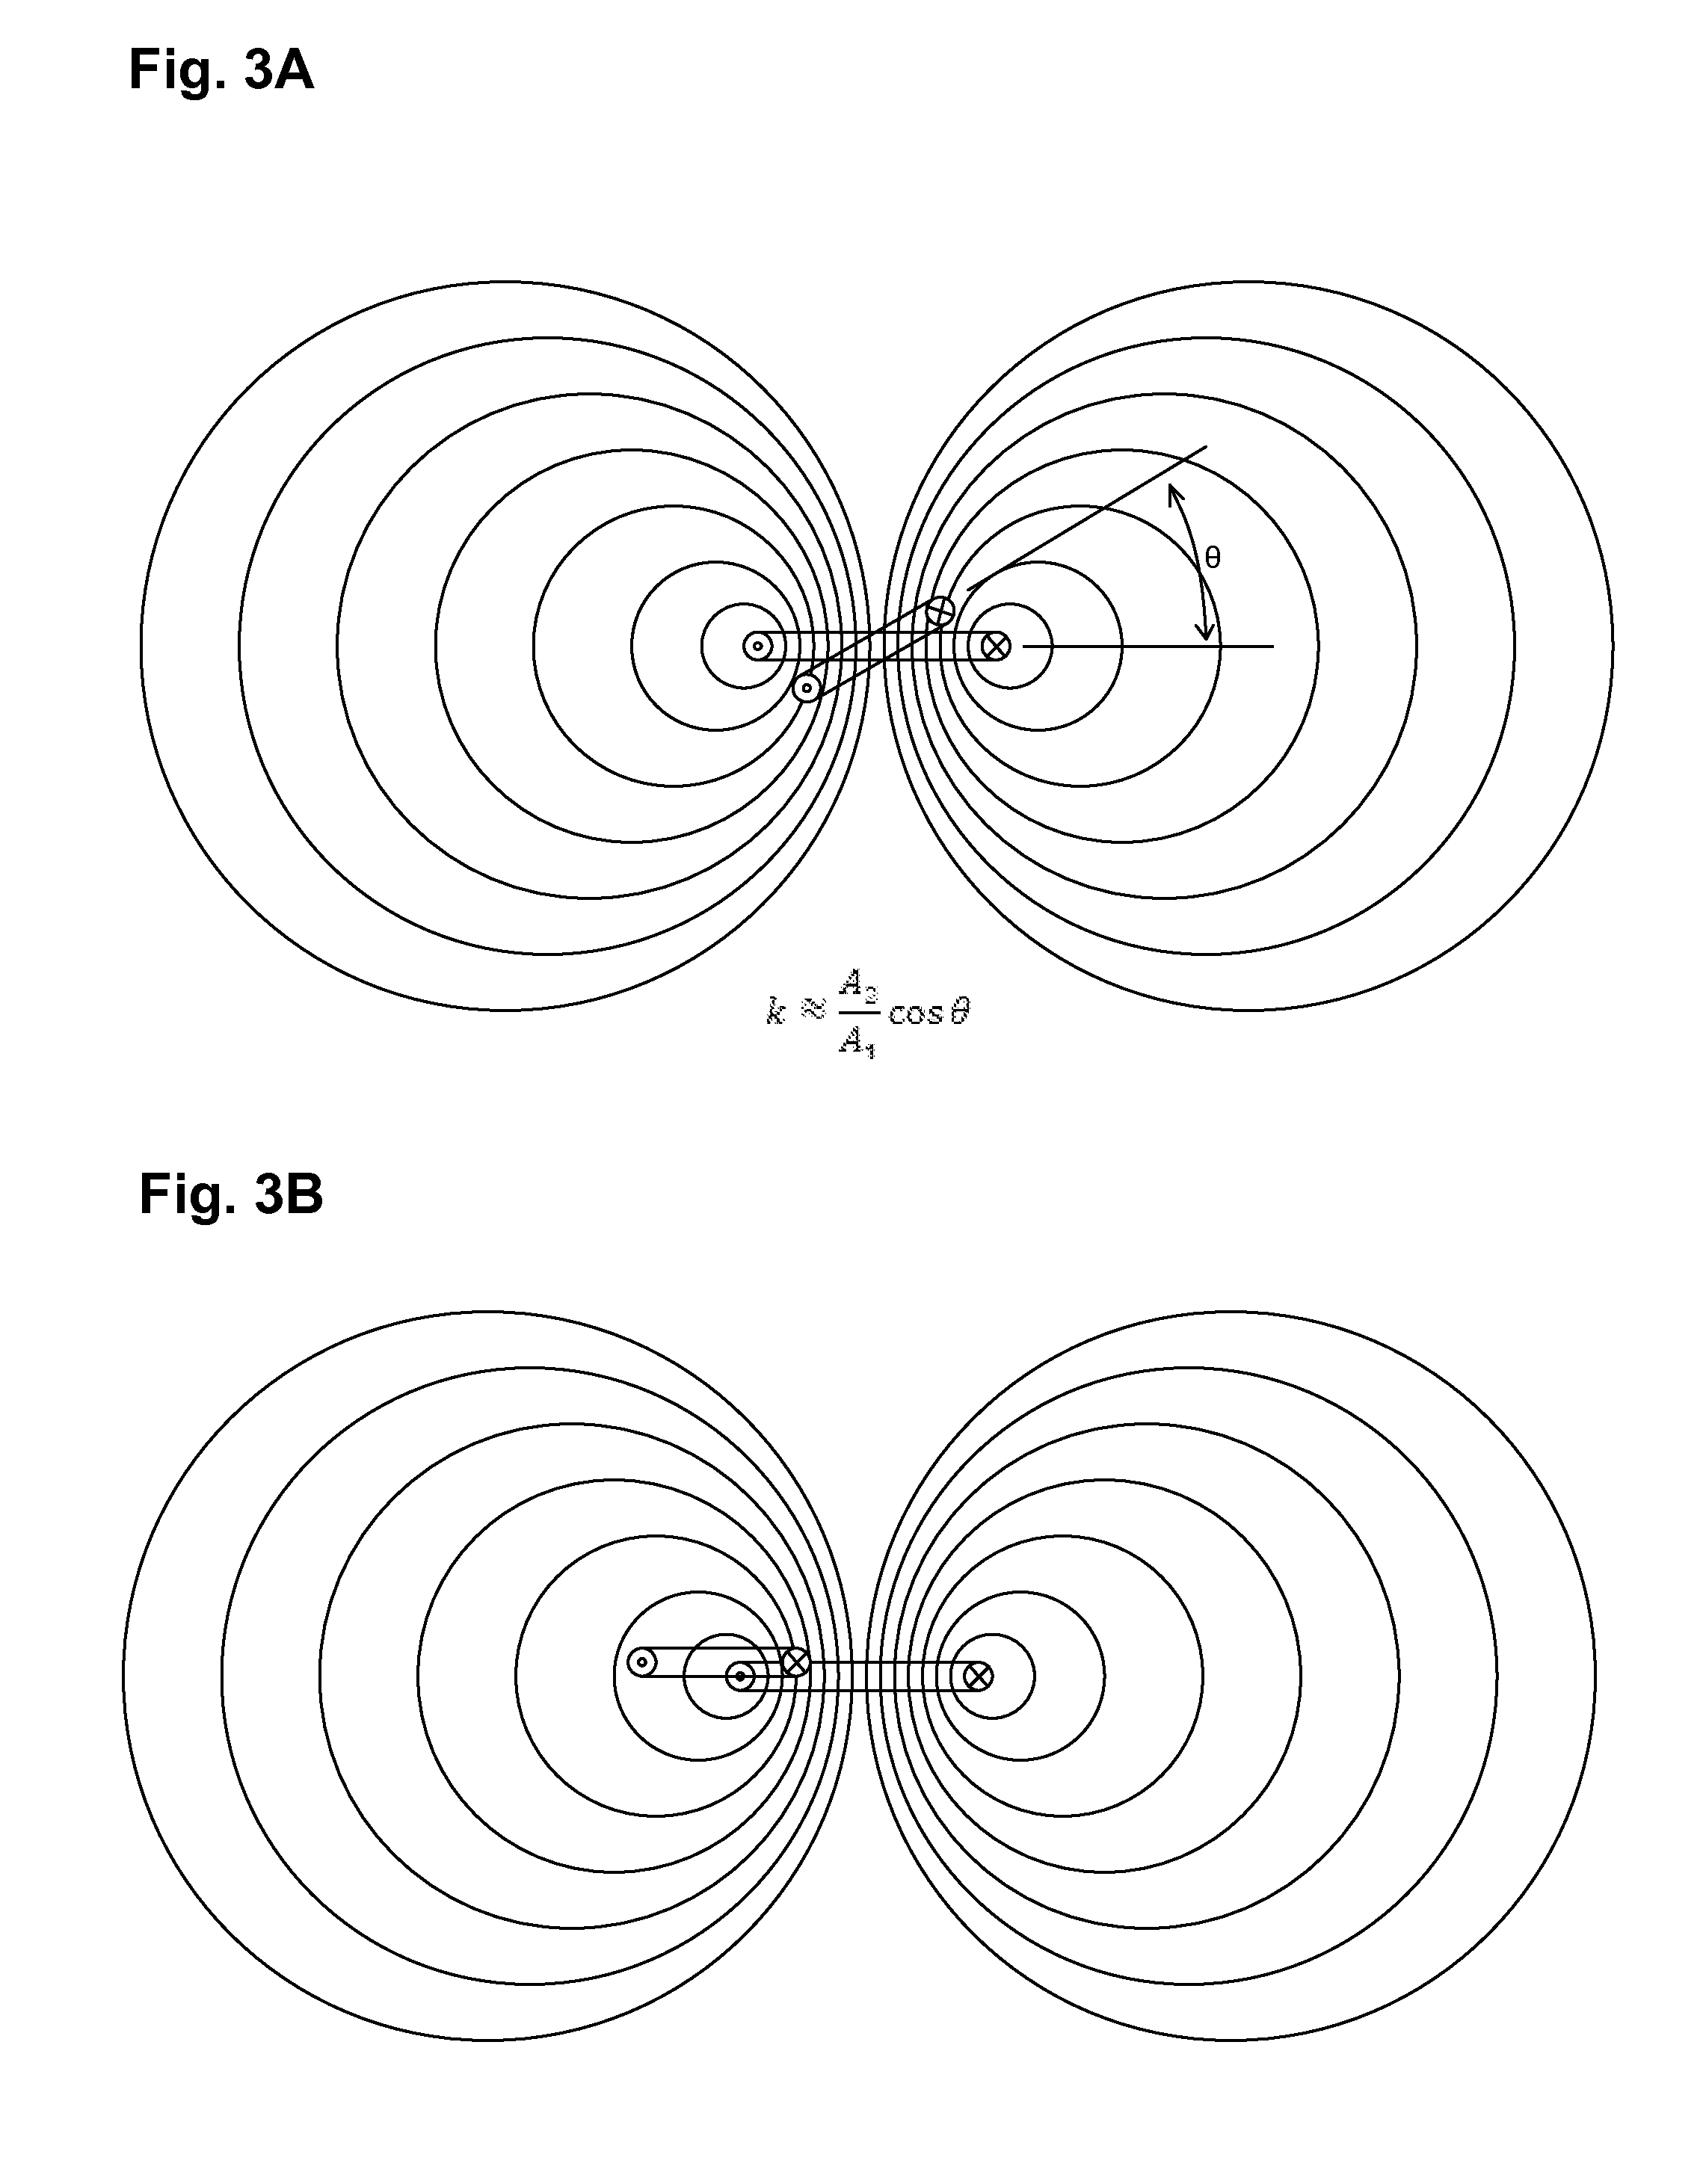 Magnetic power transmission utilizing phased transmitter coil arrays and phased receiver coil arrays